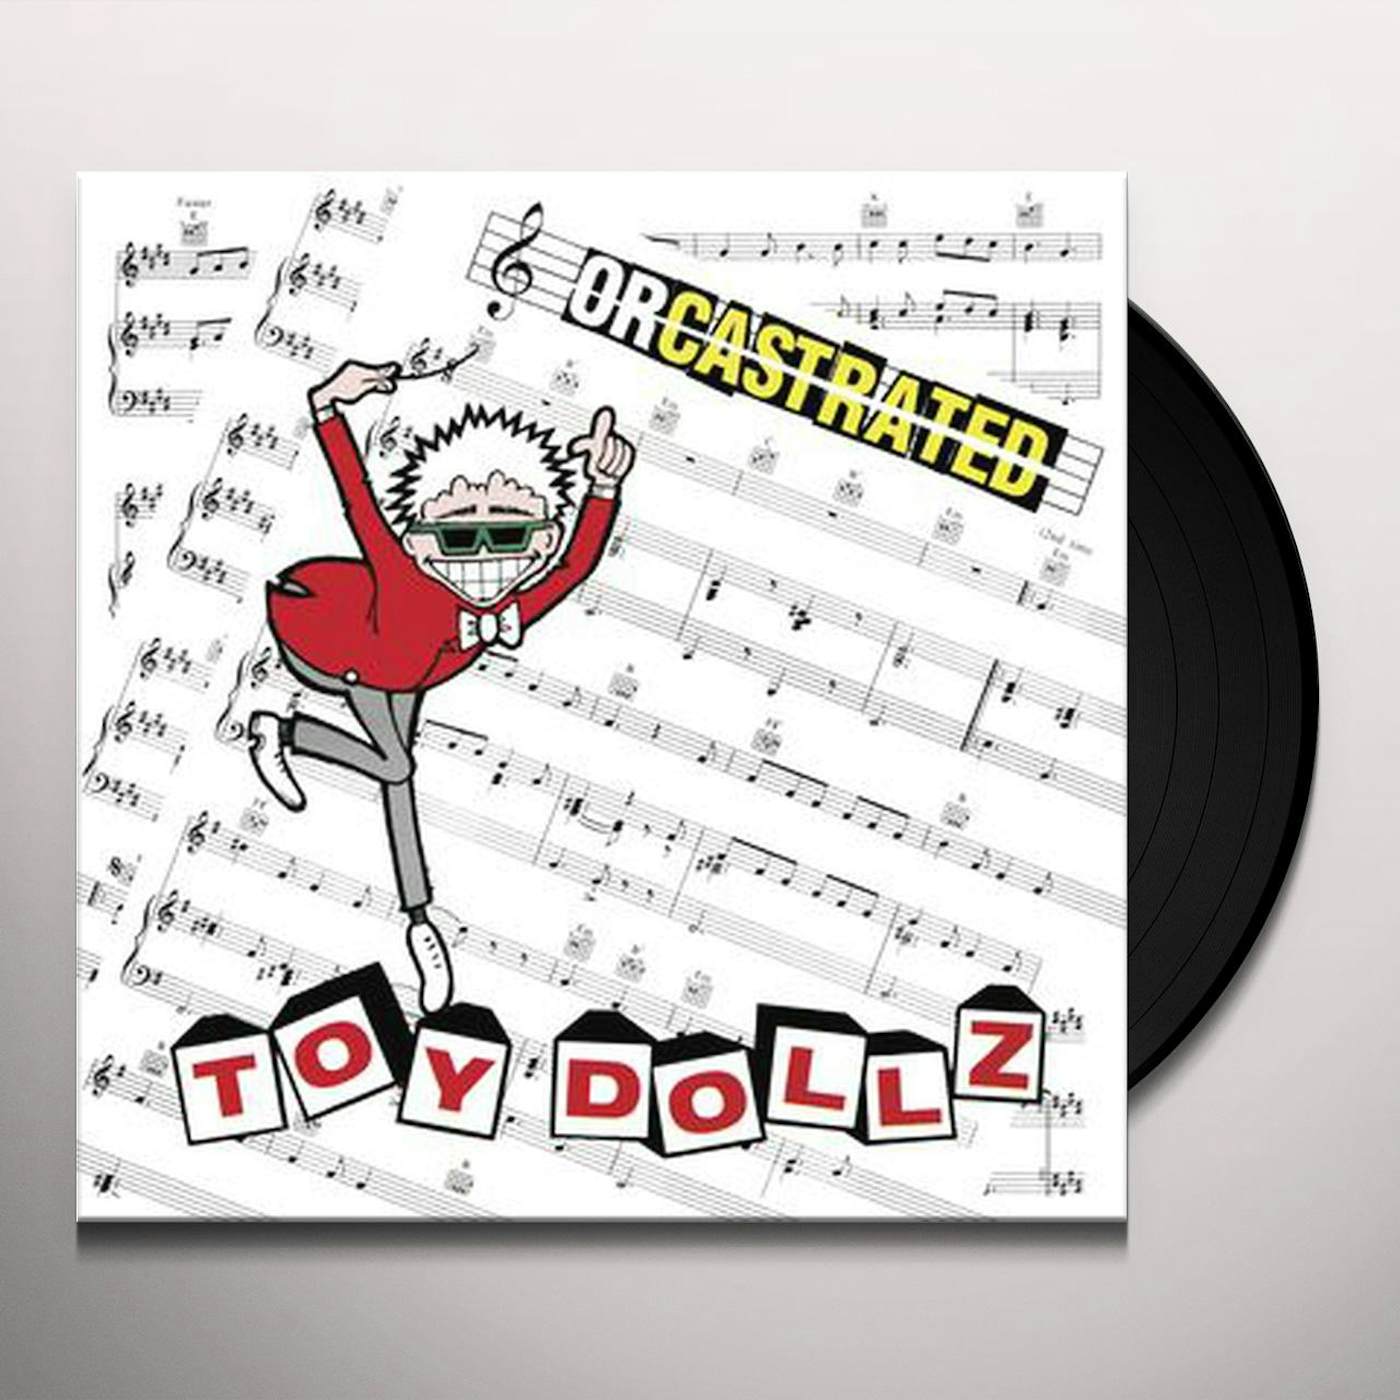 The Toy Dolls Orcastrated Vinyl Record